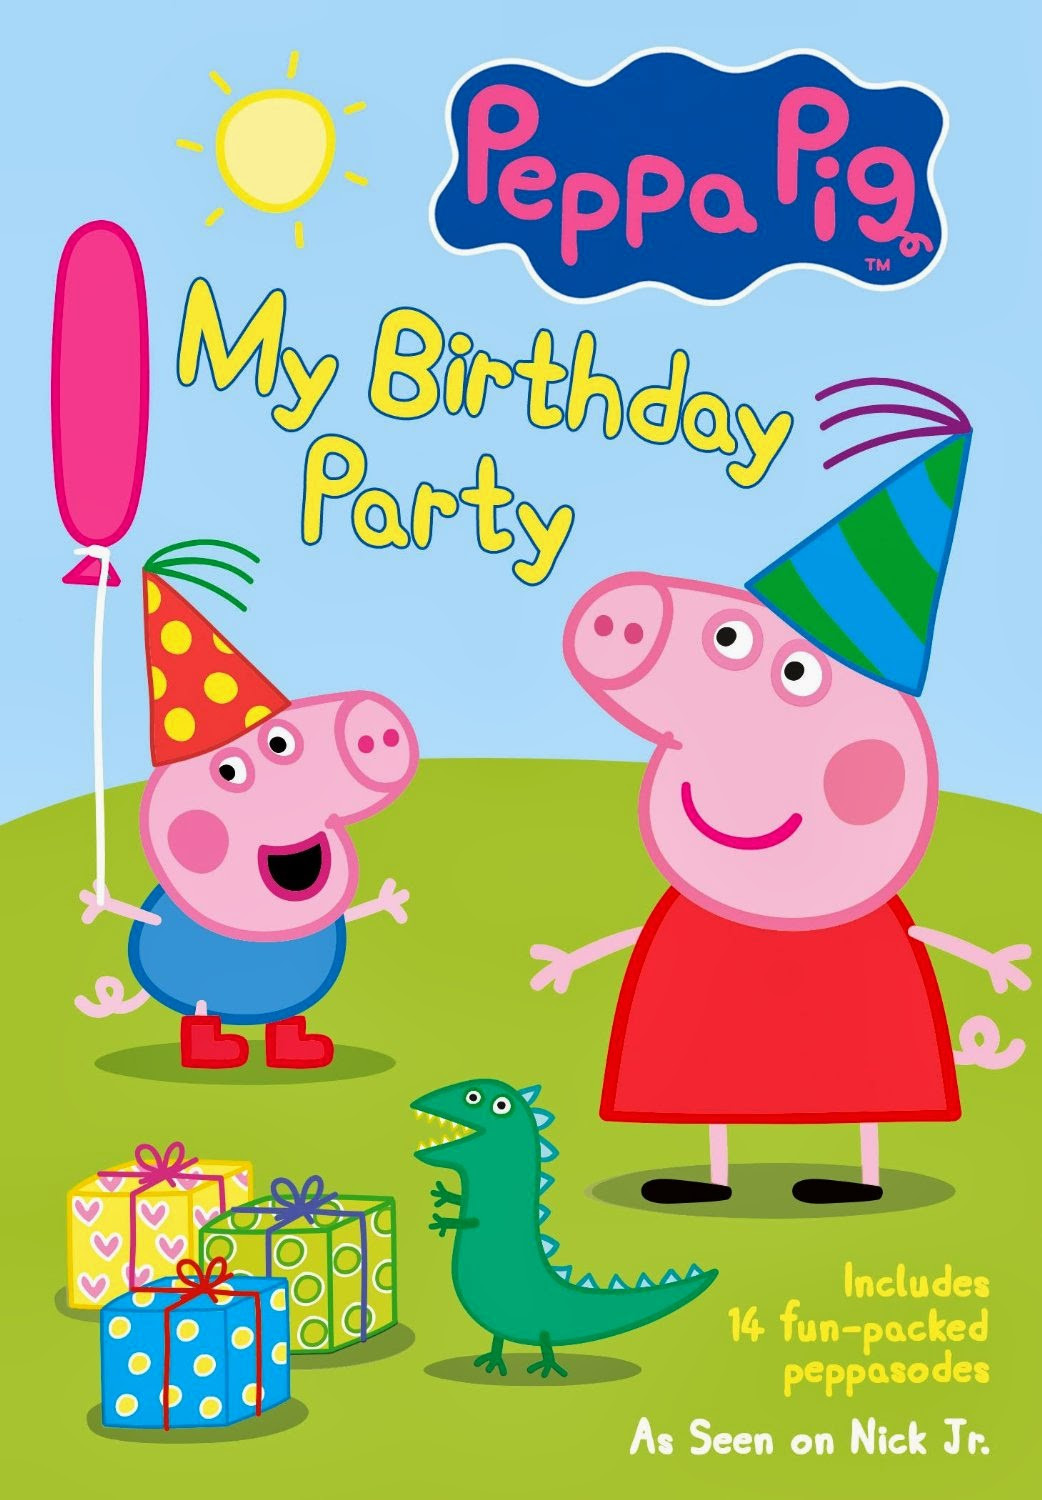 Peppa Pig Birthday Party
 Thanks Mail Carrier